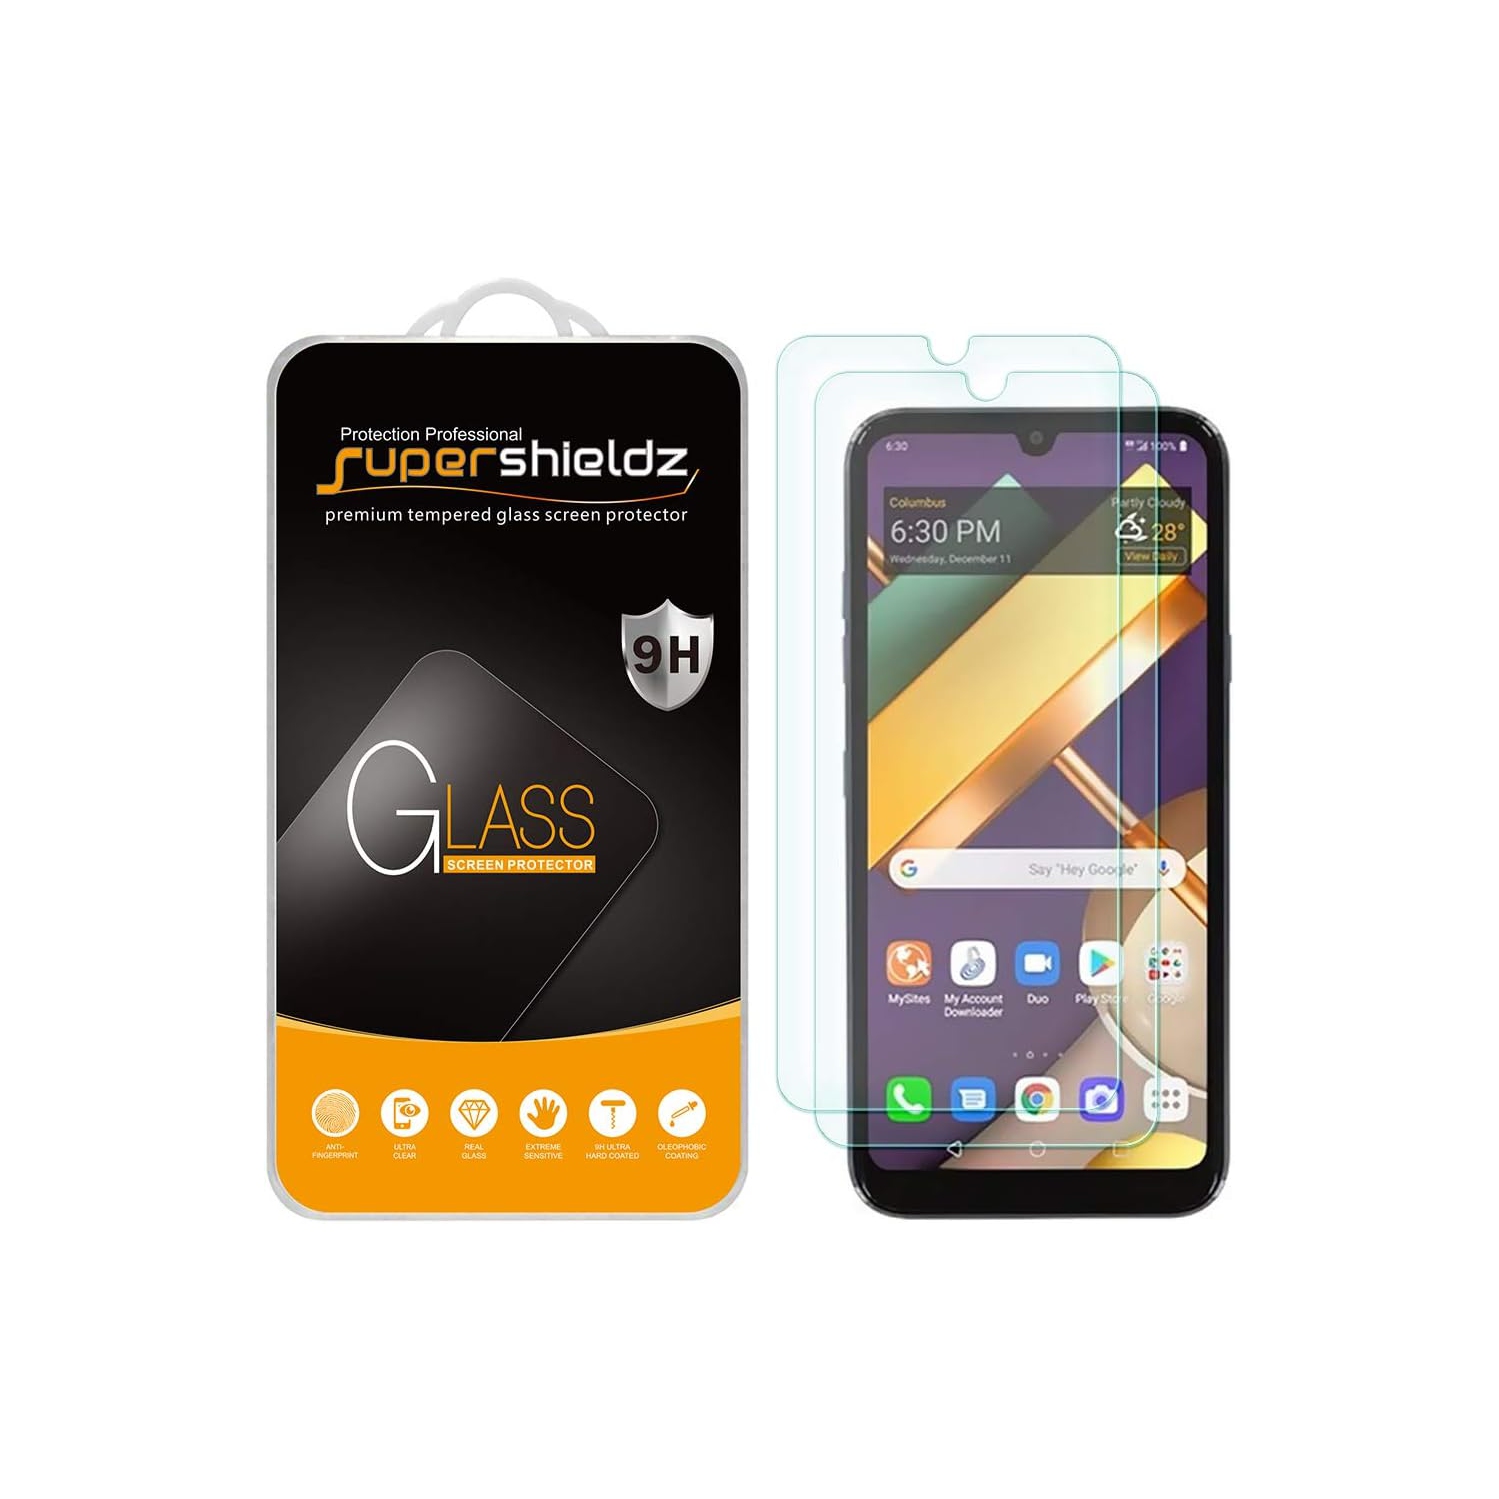 (2 Pack) for LG Premier Pro Plus (L455DL) Tempered Glass Screen Protector, Anti Scratch, Bubble Free